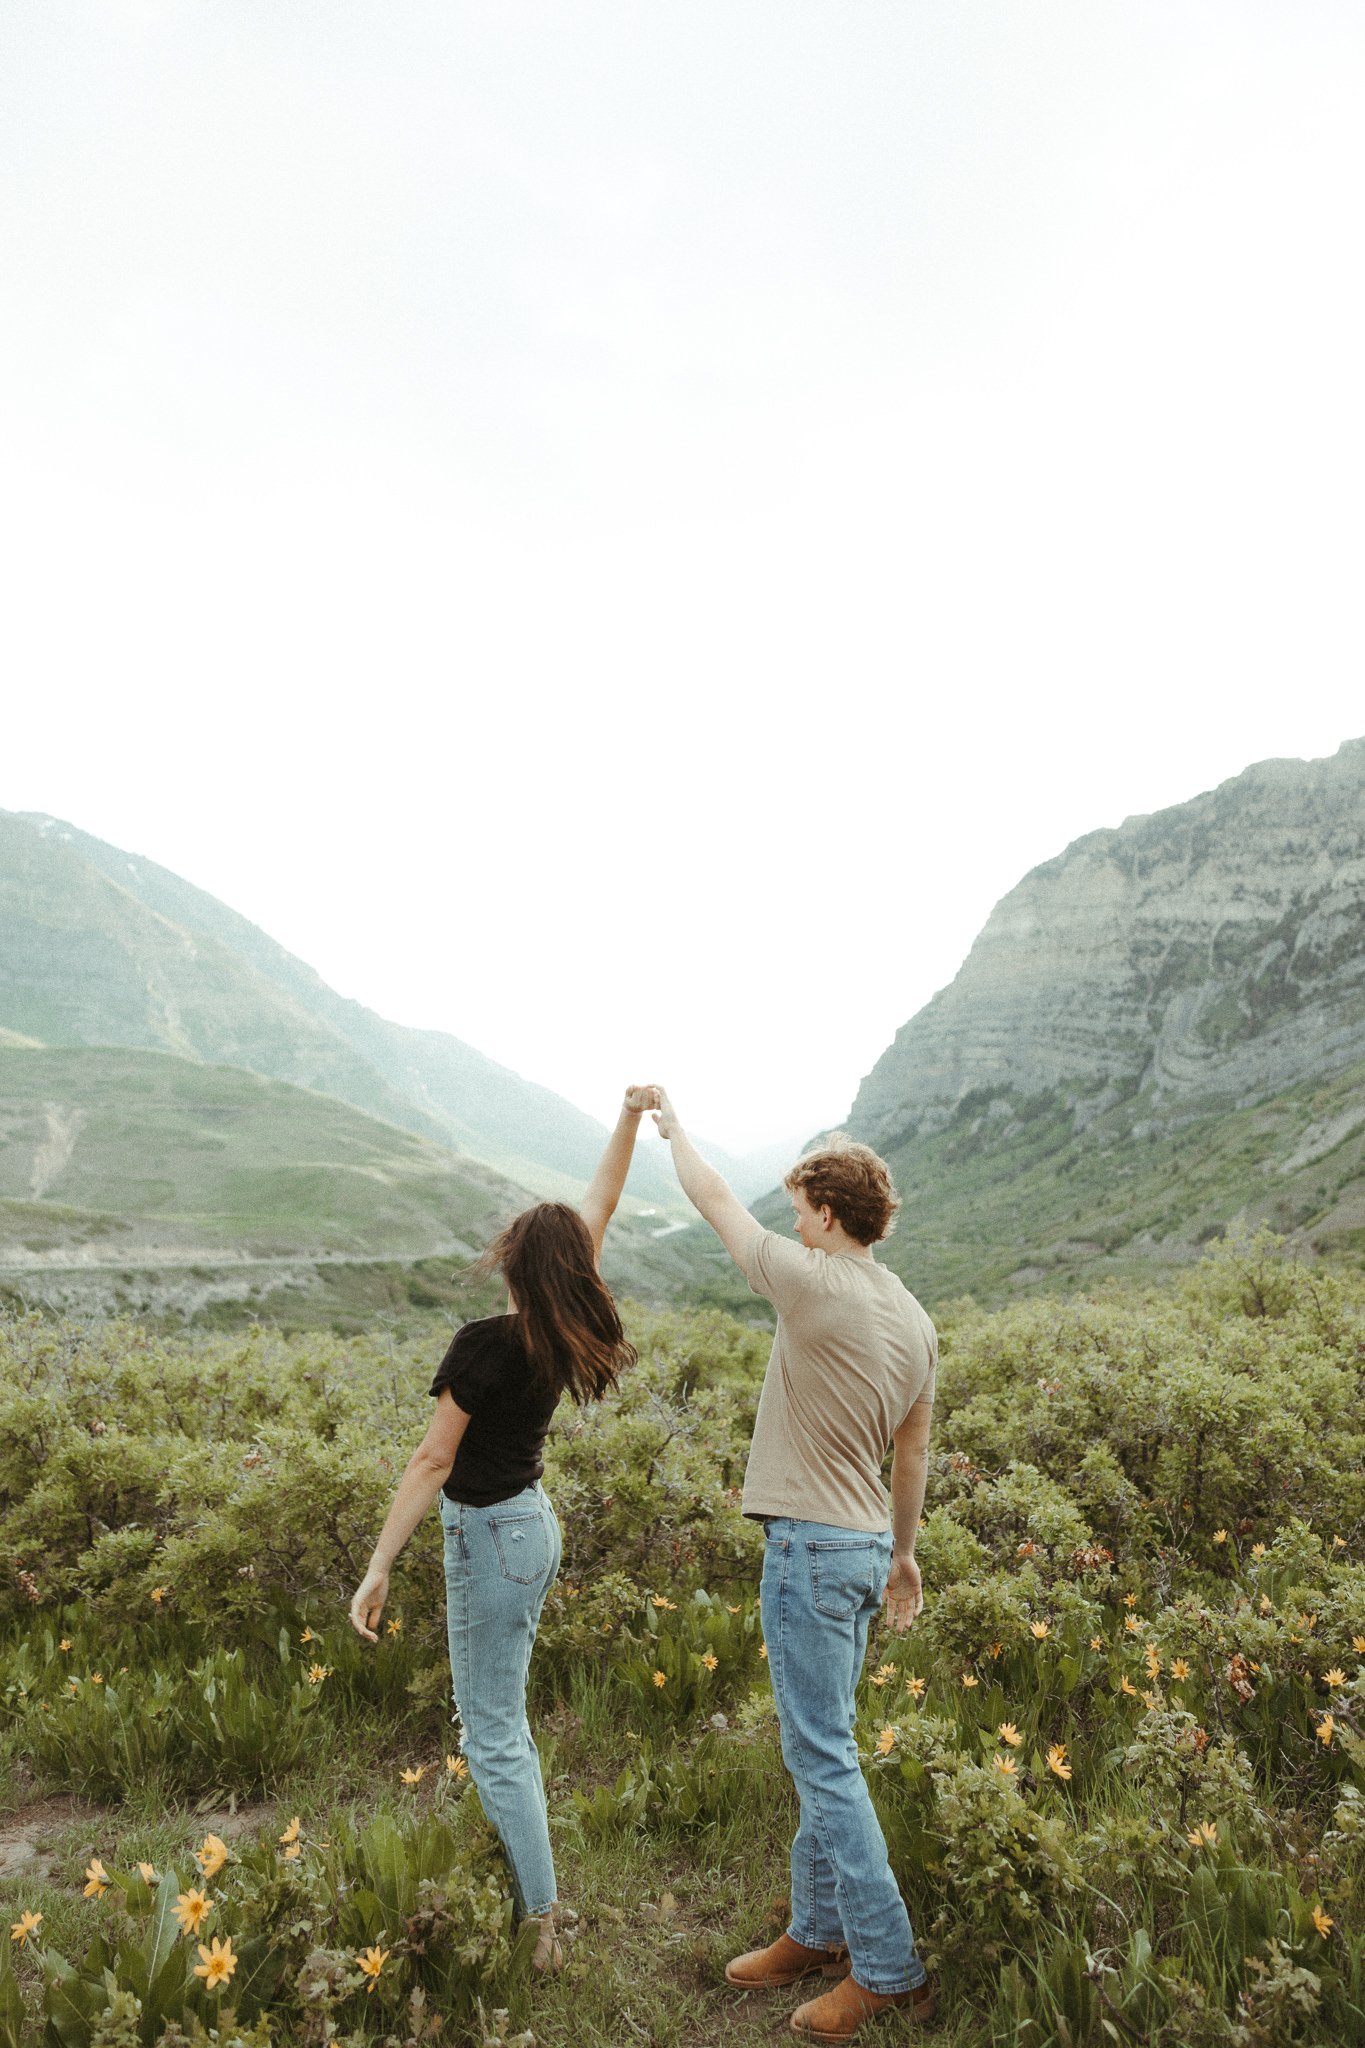 Spring-Provo-Canyon-Wildflowers-Engagement-Session-46